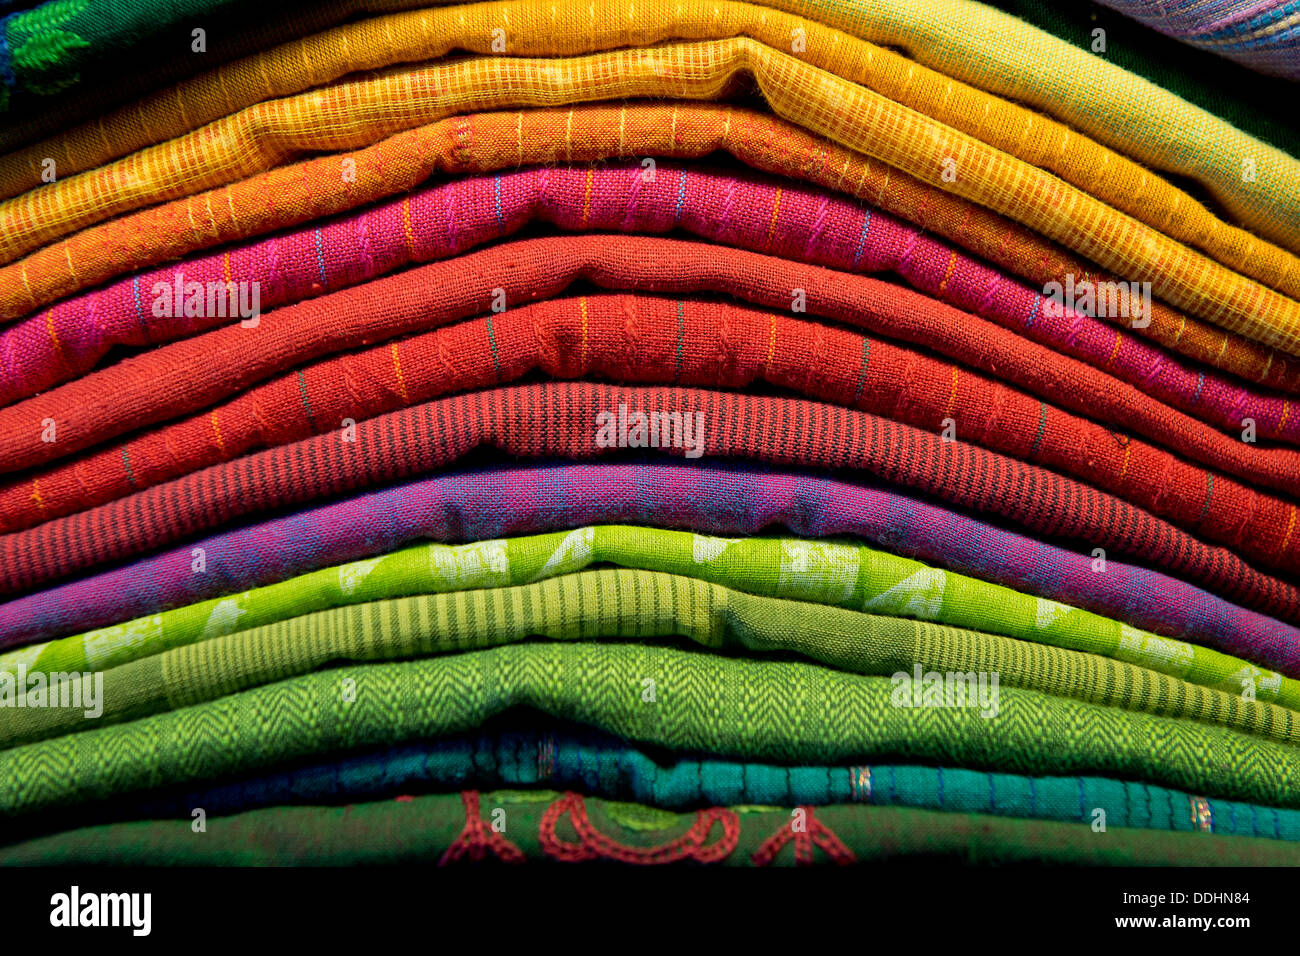 Stacked colourful towels Stock Photo